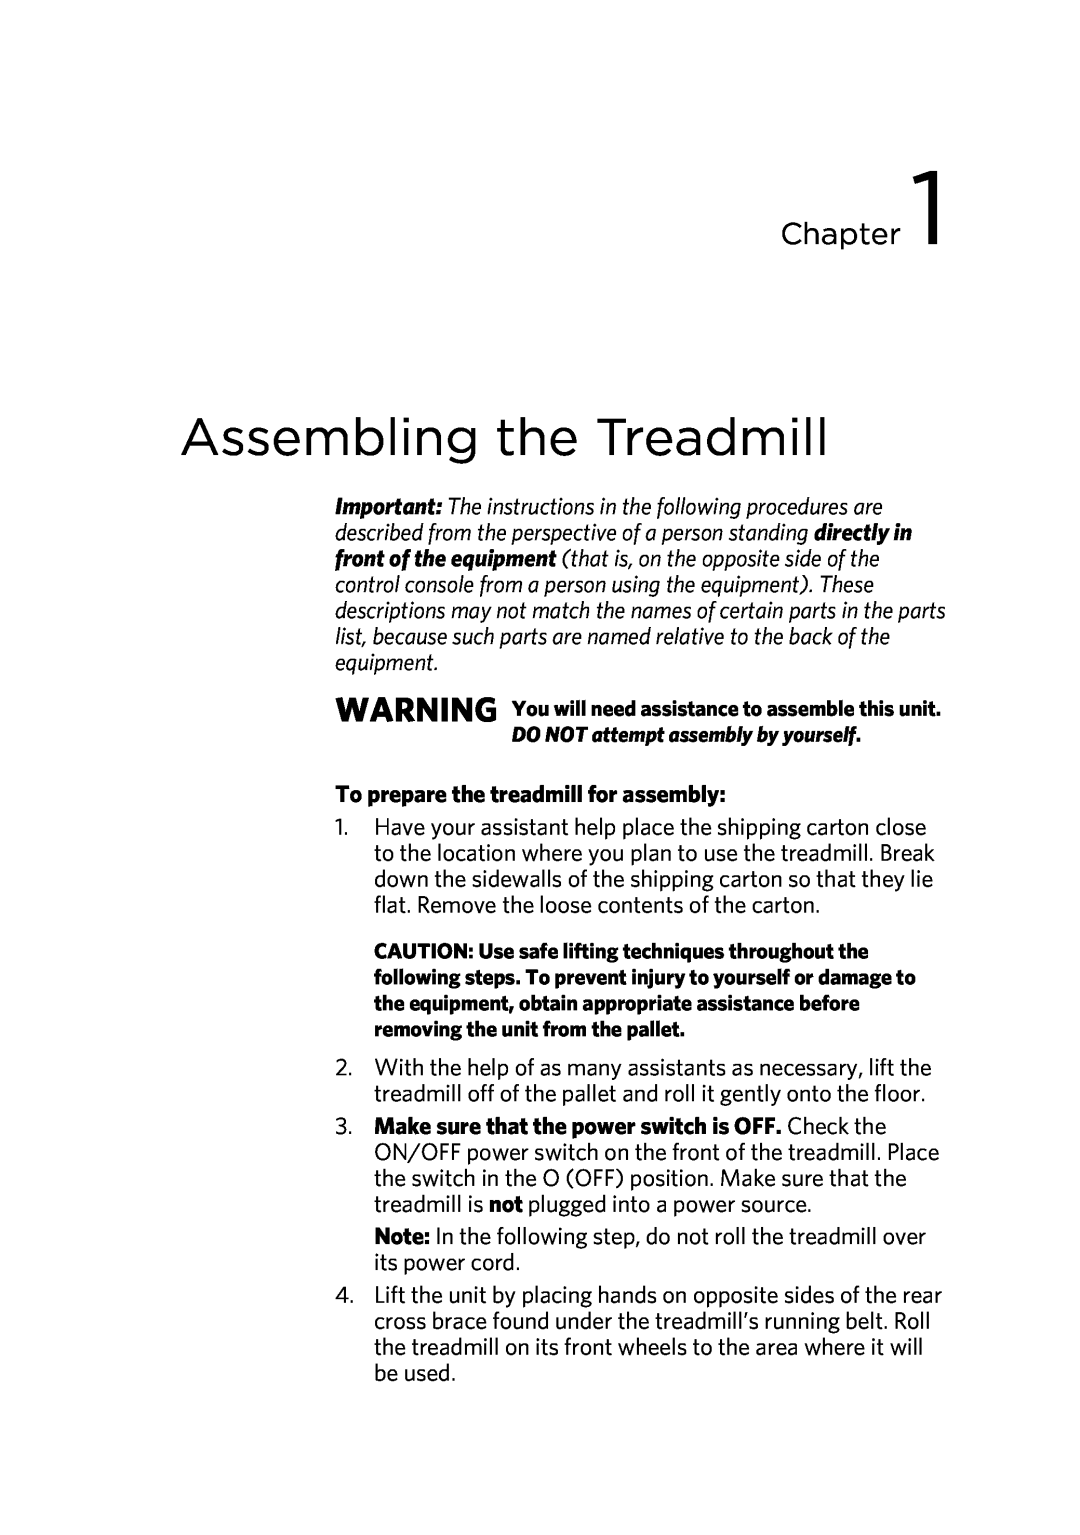 Precor P80 manual Assembling the Treadmill, To prepare the treadmill for assembly, Chapter 